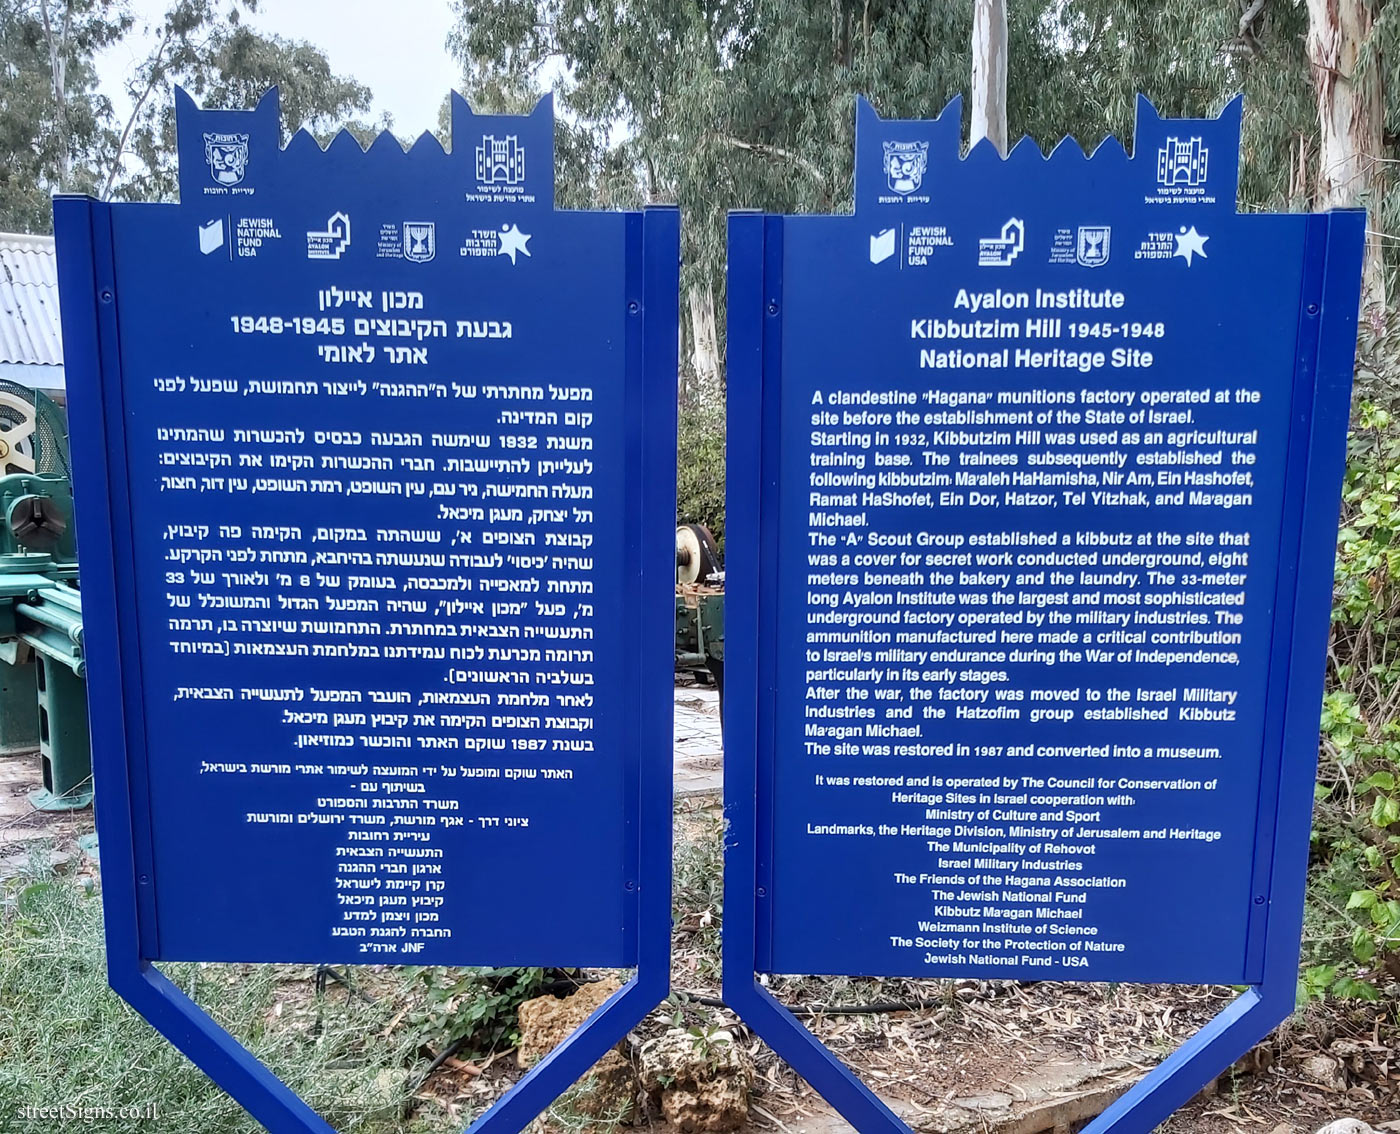 Rehovot - Heritage Sites in Israel - Ayalon Institute